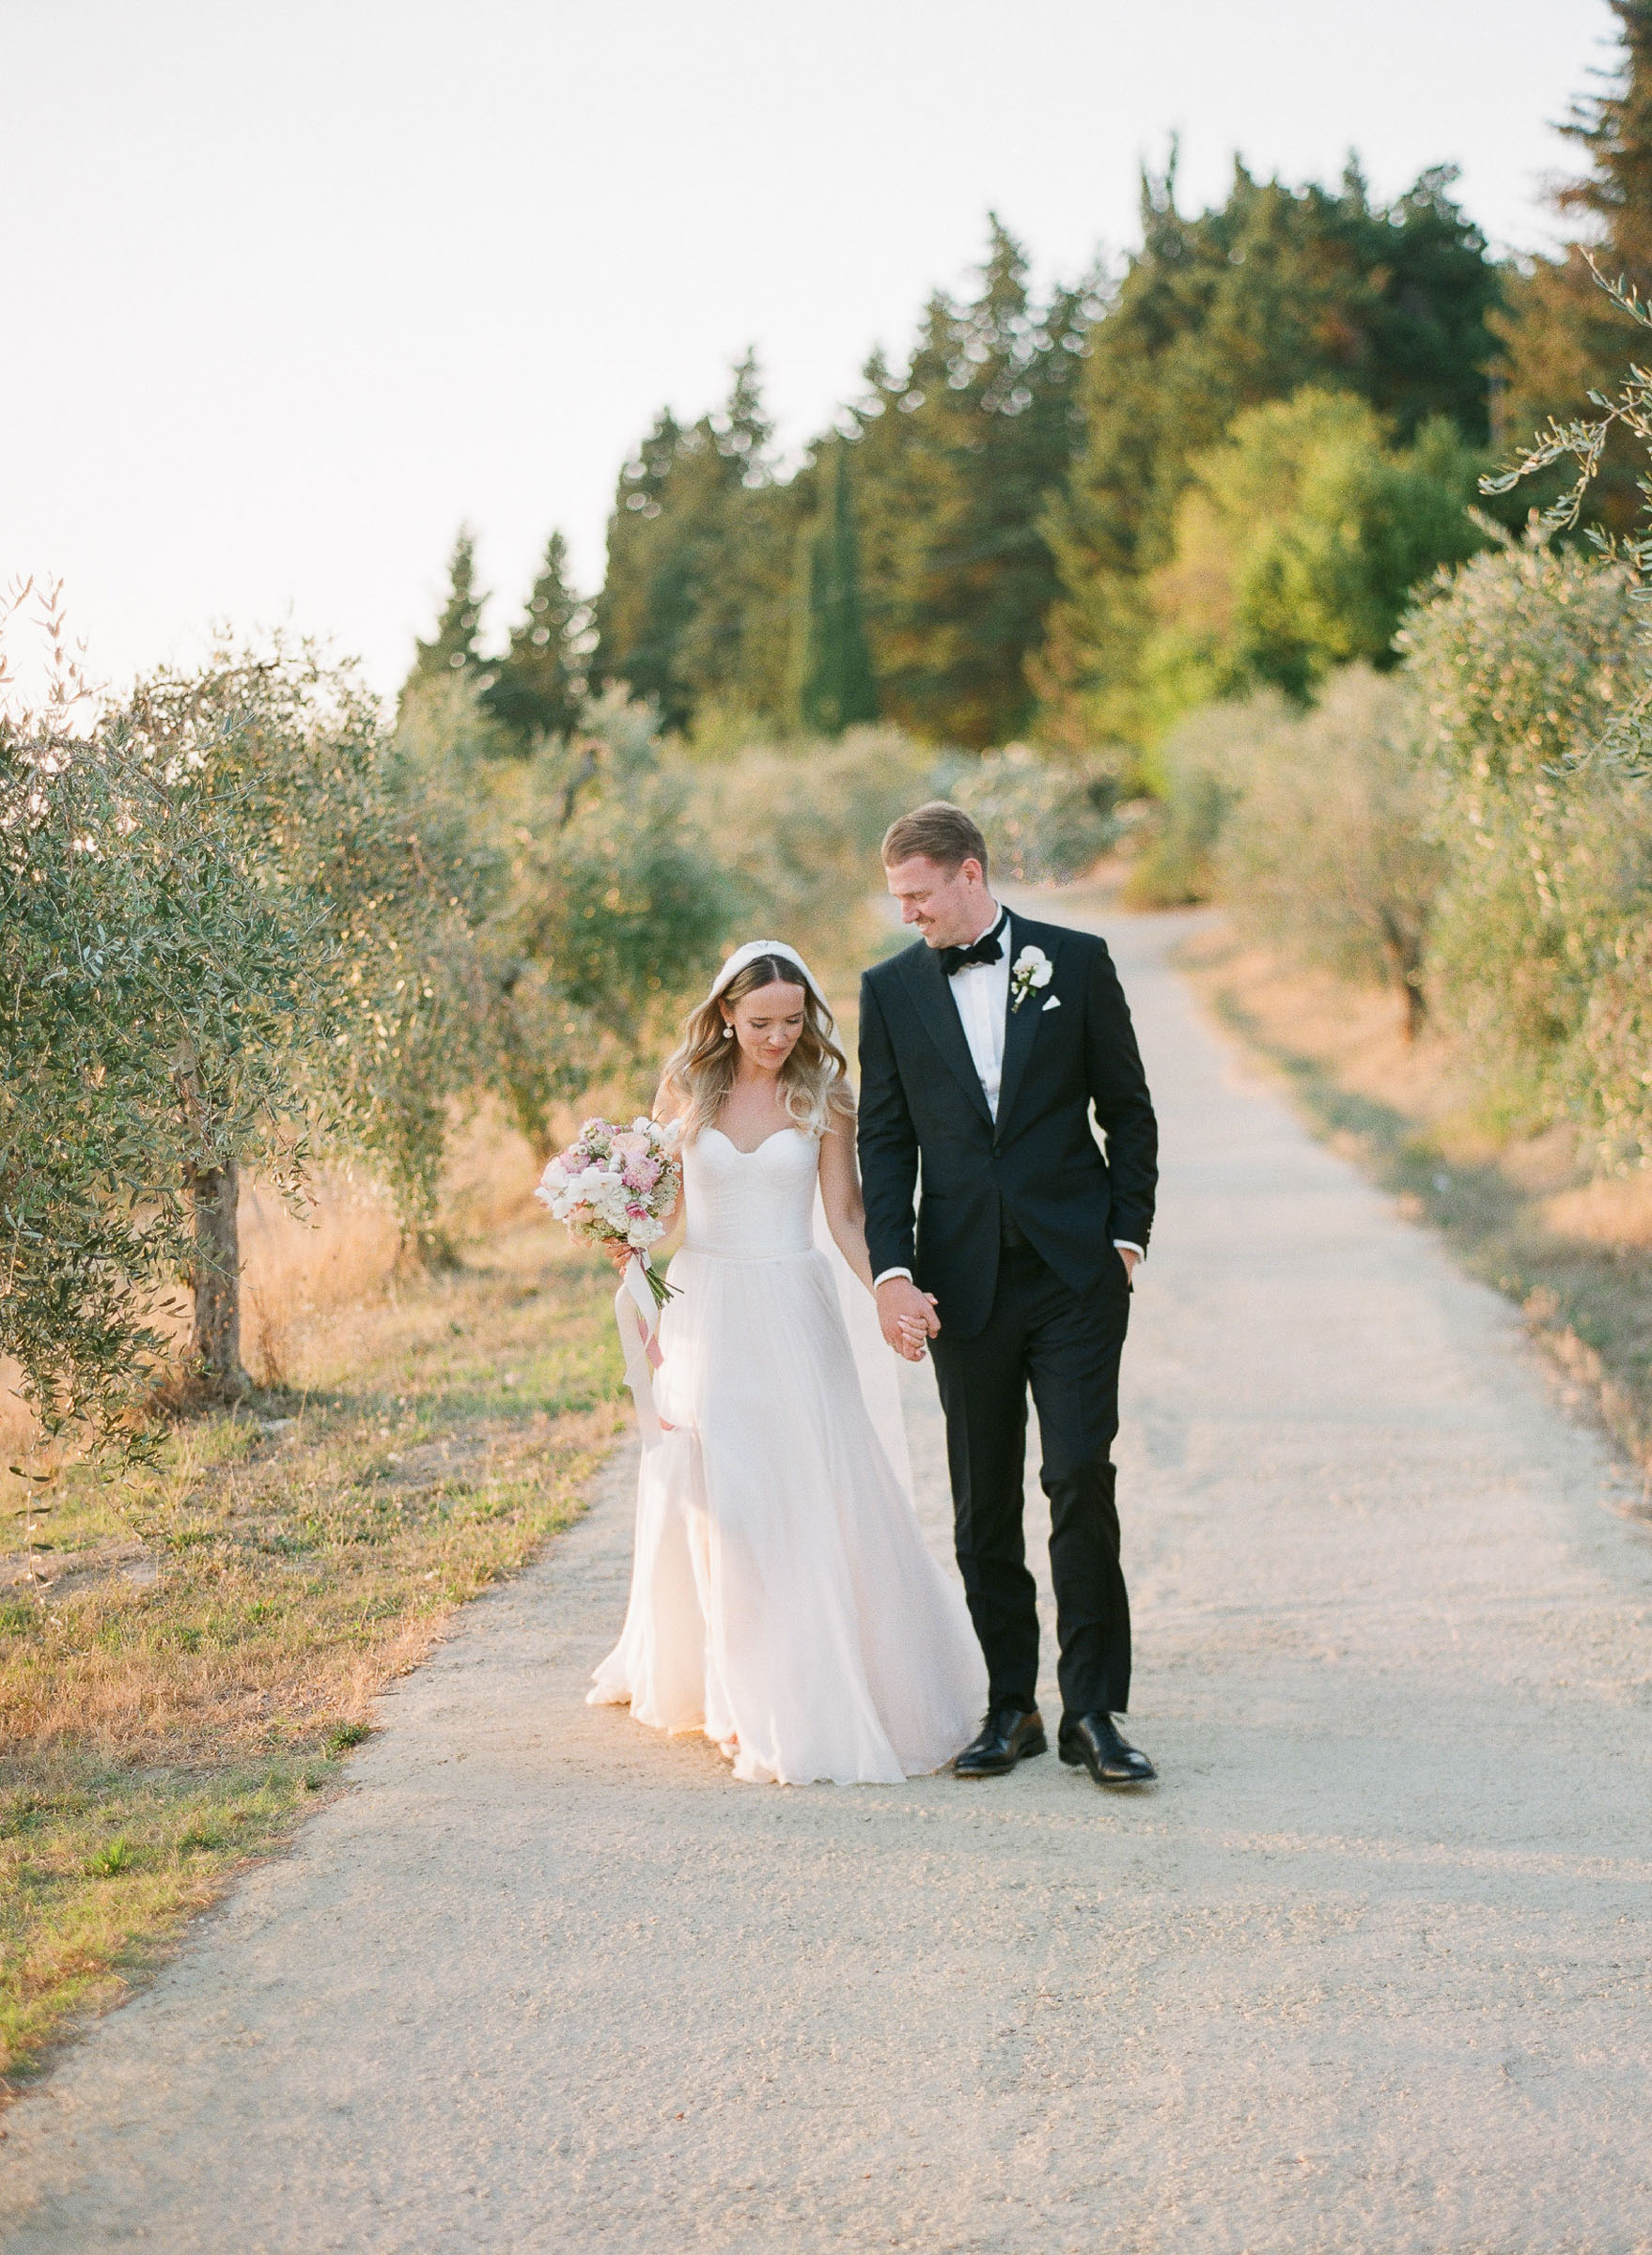 Destination wedding at Le Filigare Winery in Tuscany